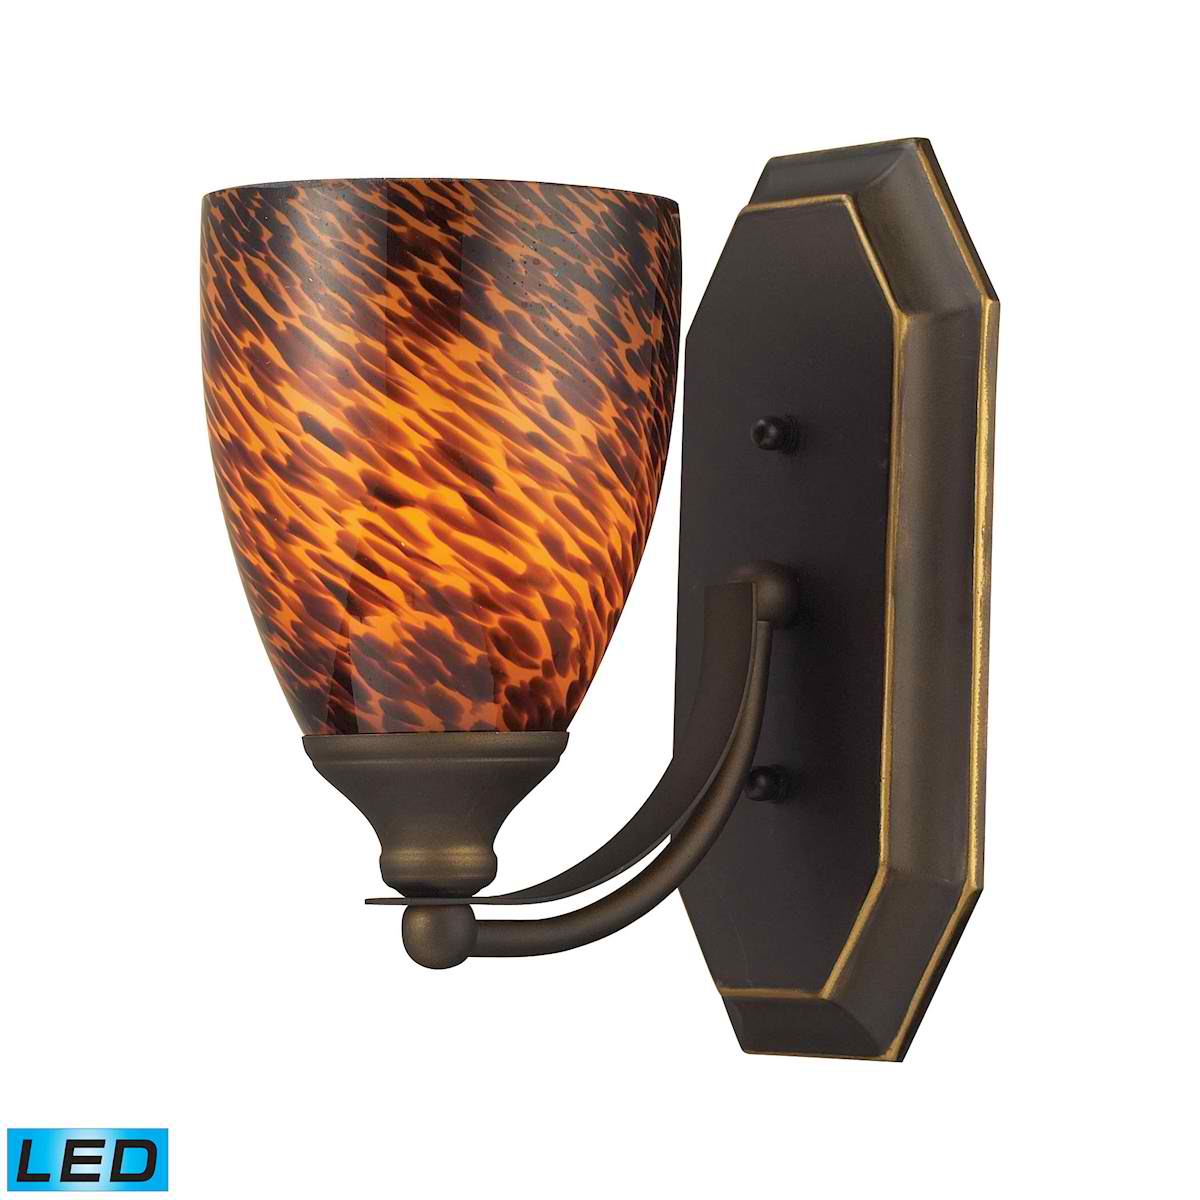 1 Light Vanity in Aged Bronze and Espresso Glass - LED Offering Up To 800 Lumens (60 Watt Equivalent)